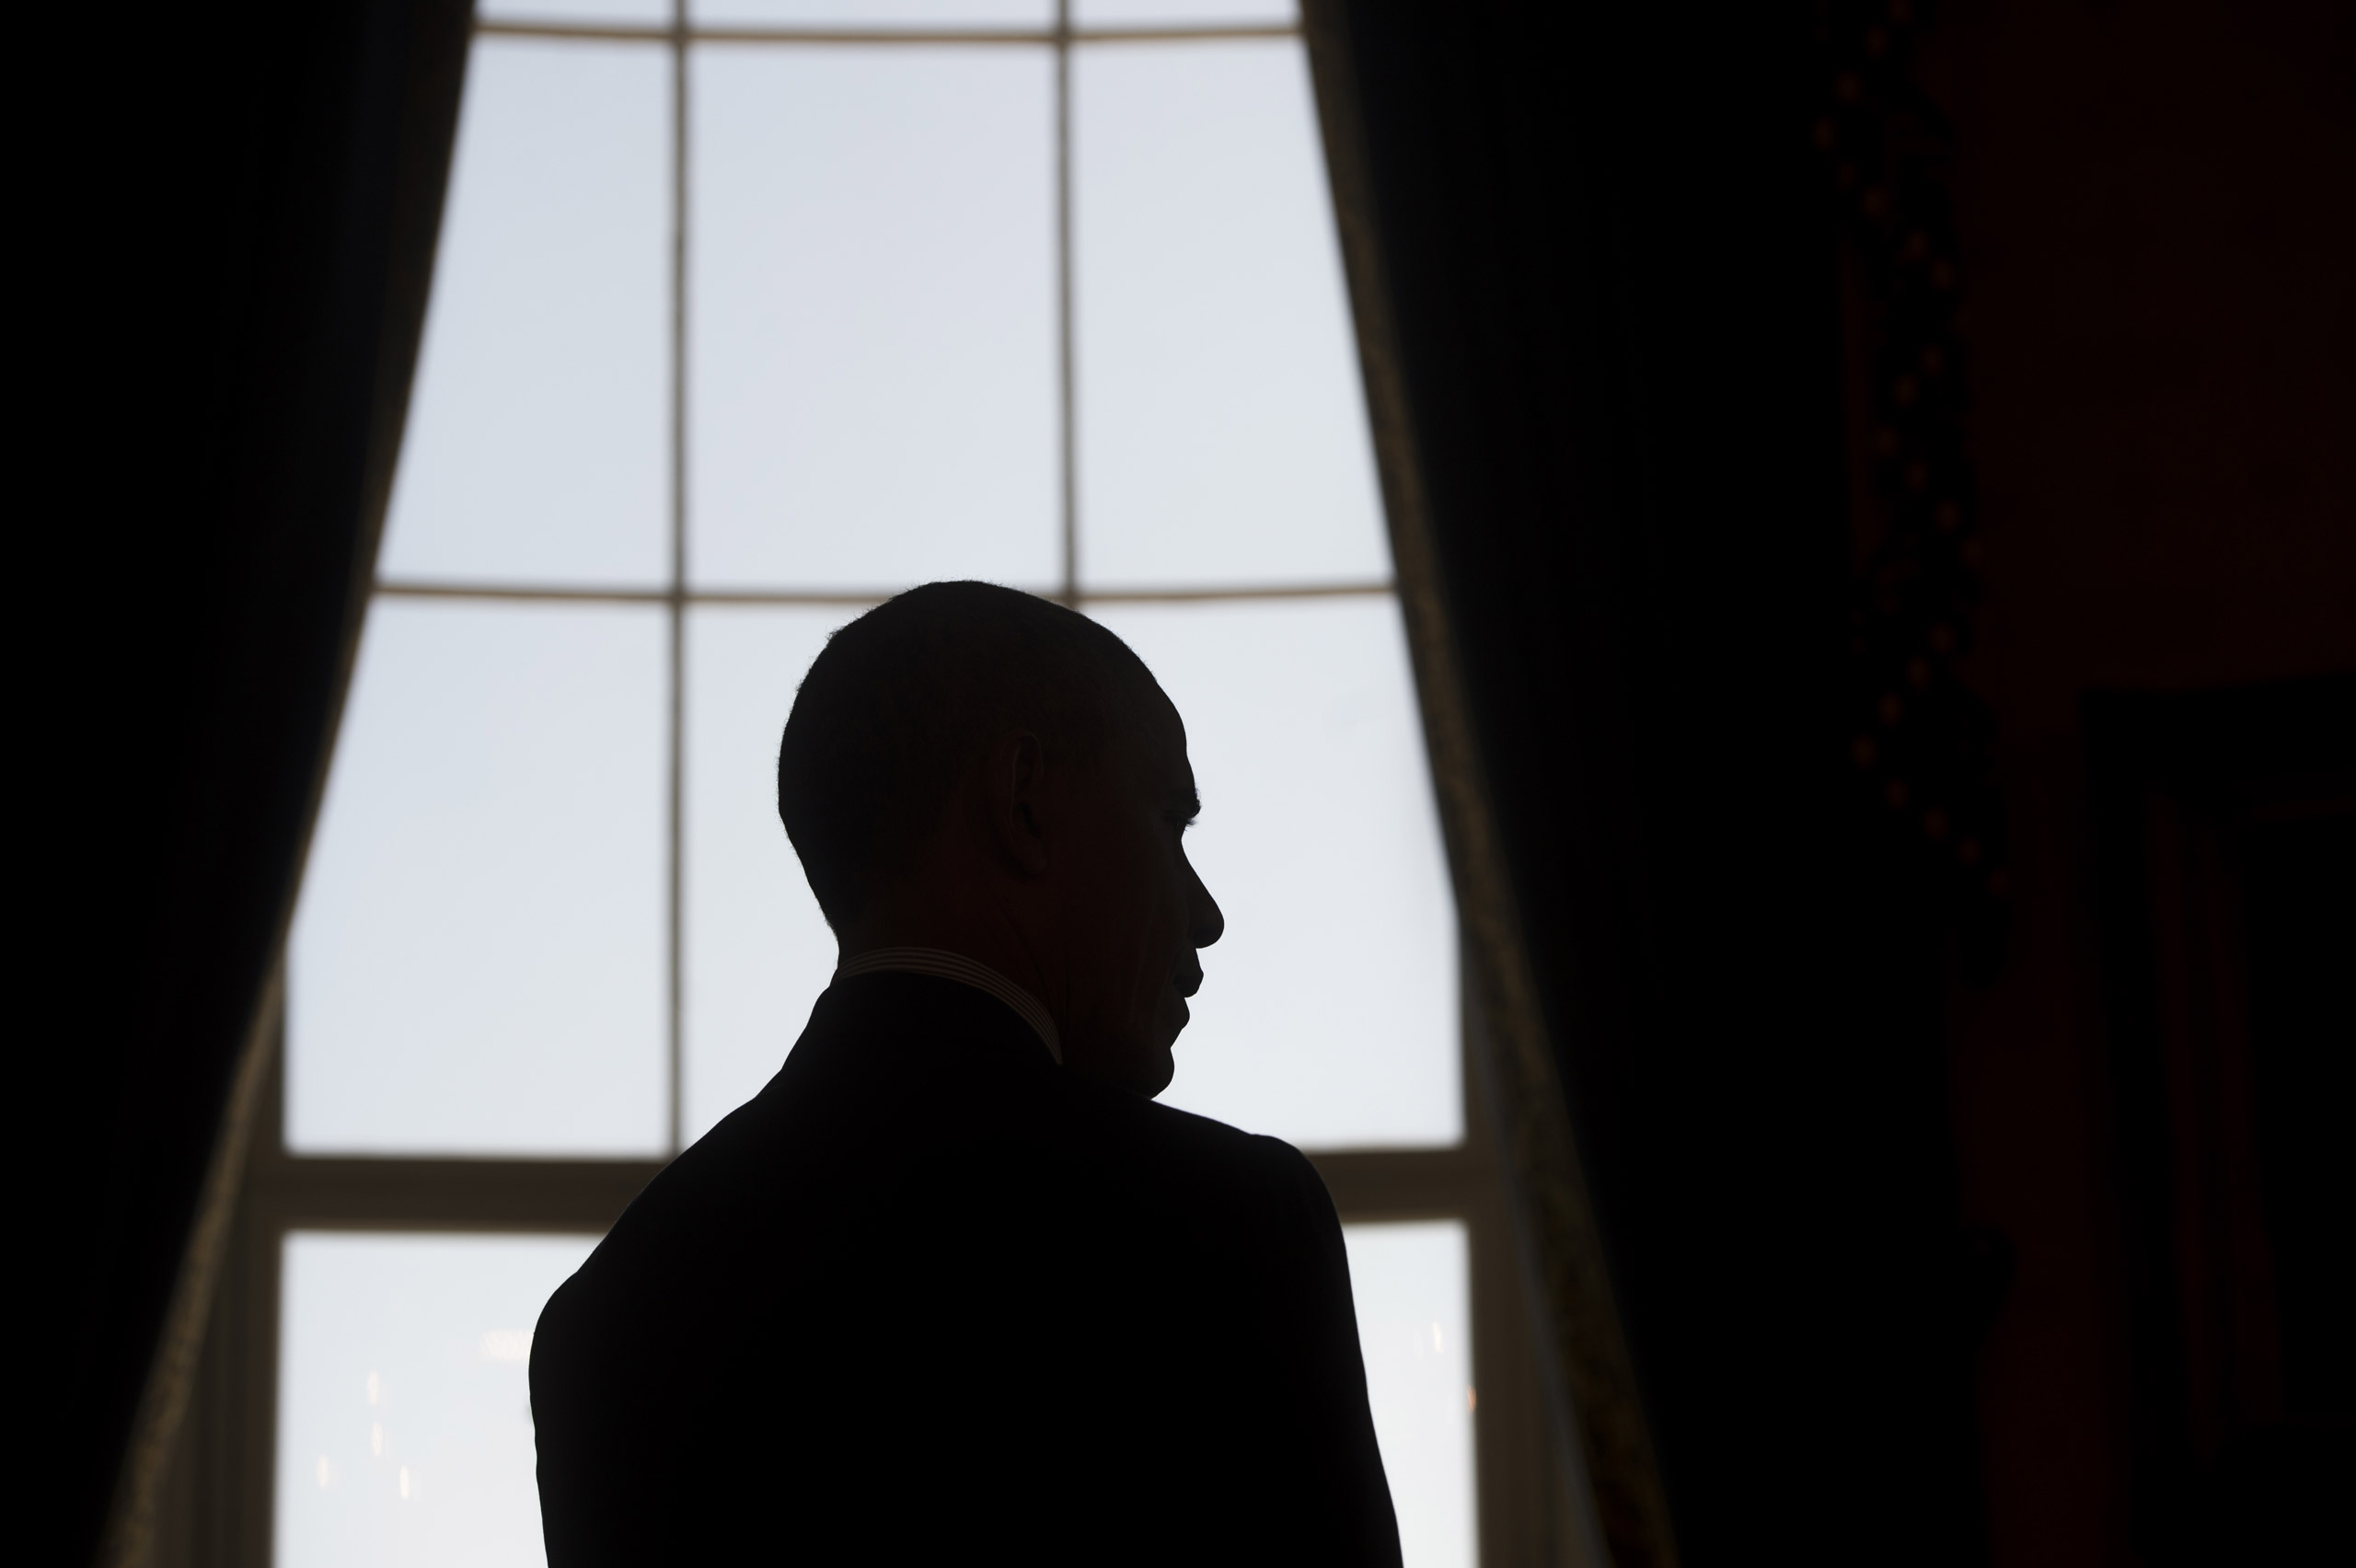 President Barack Obama at the White House in Washington on April 13, 2016. (Saul Loeb—AFP/Getty Images)